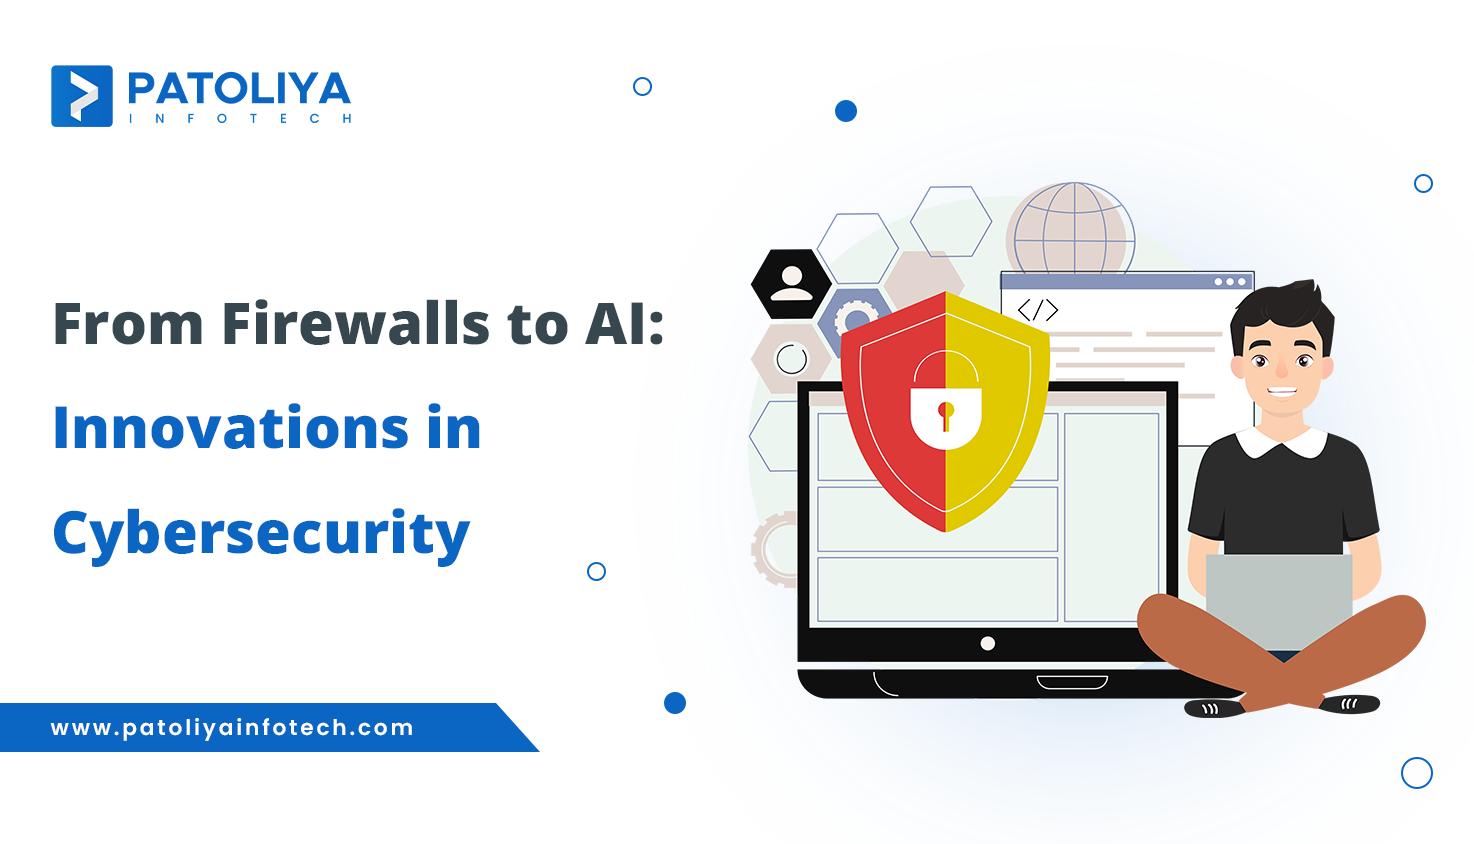 From Firewalls to AI: Innovations in Cybersecurity